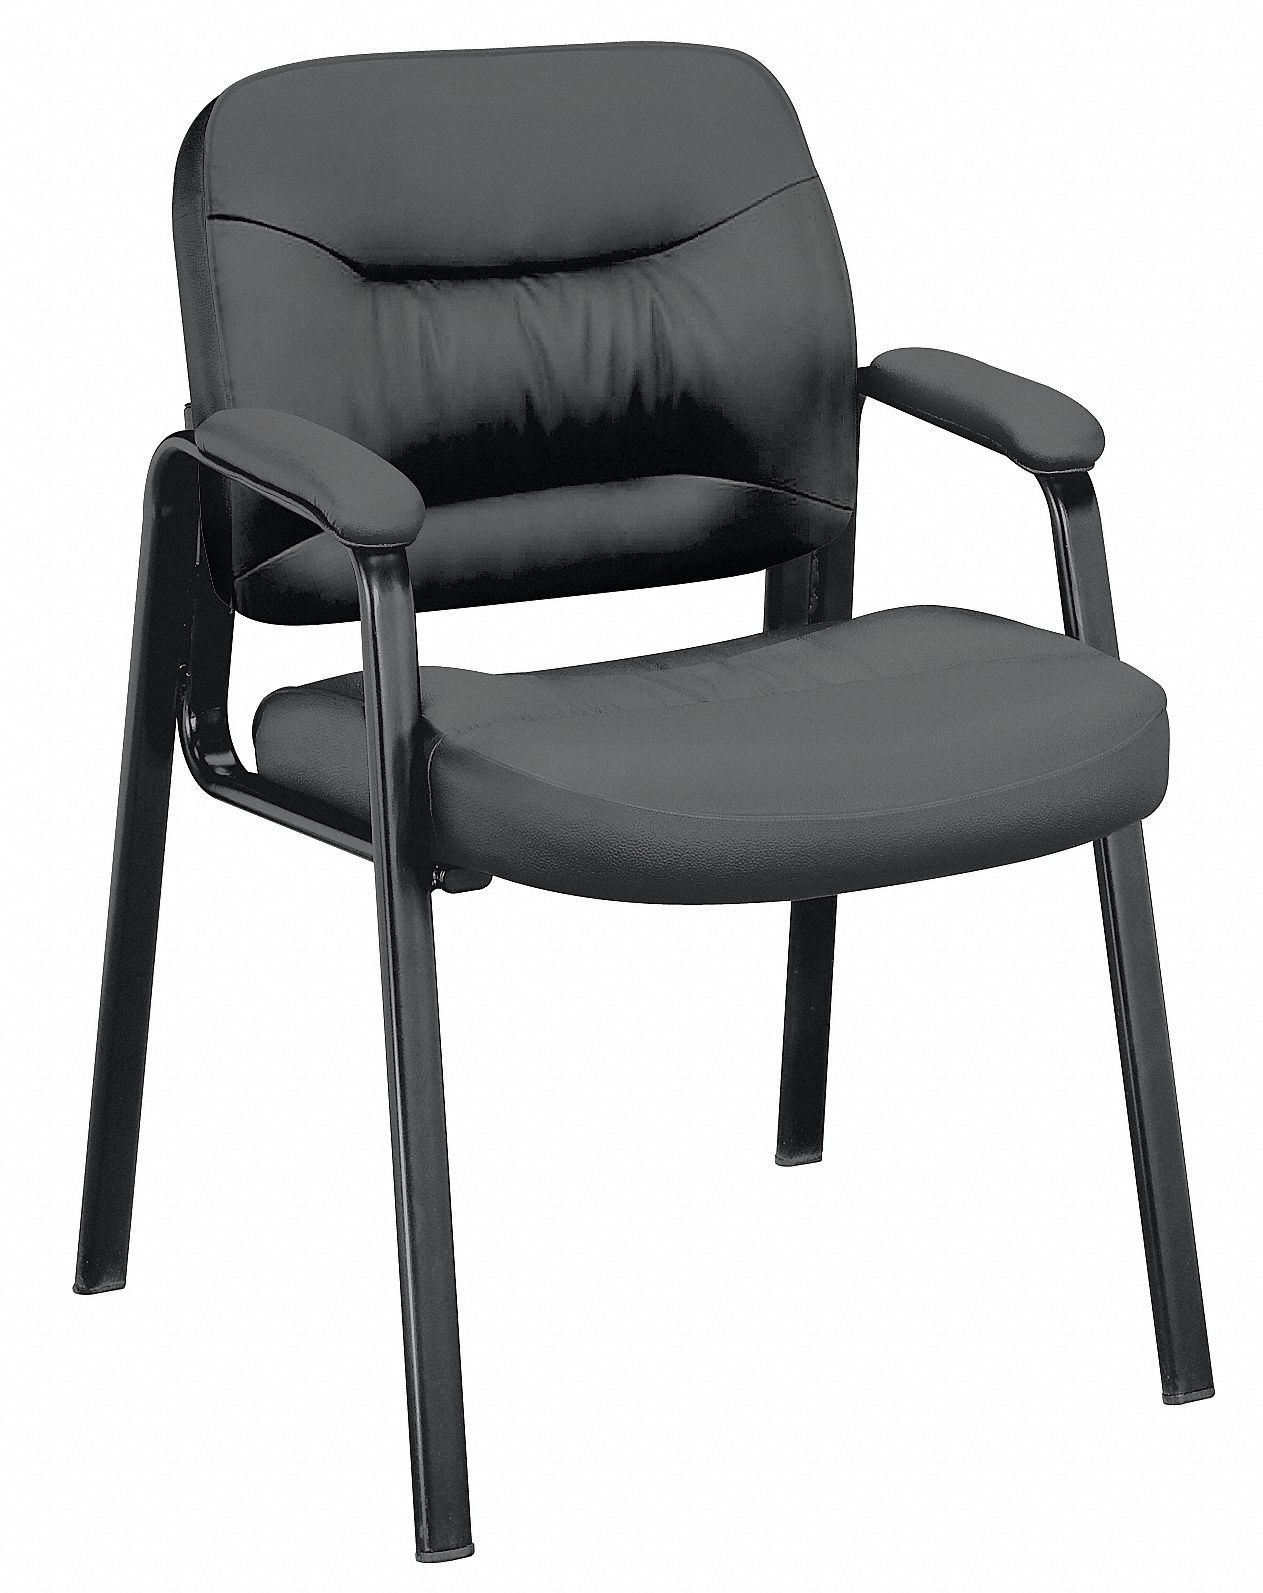 BASYX BY HON VL643 Guest Chair with Arms, Black - 14Z831|HVL643.SB11 ...